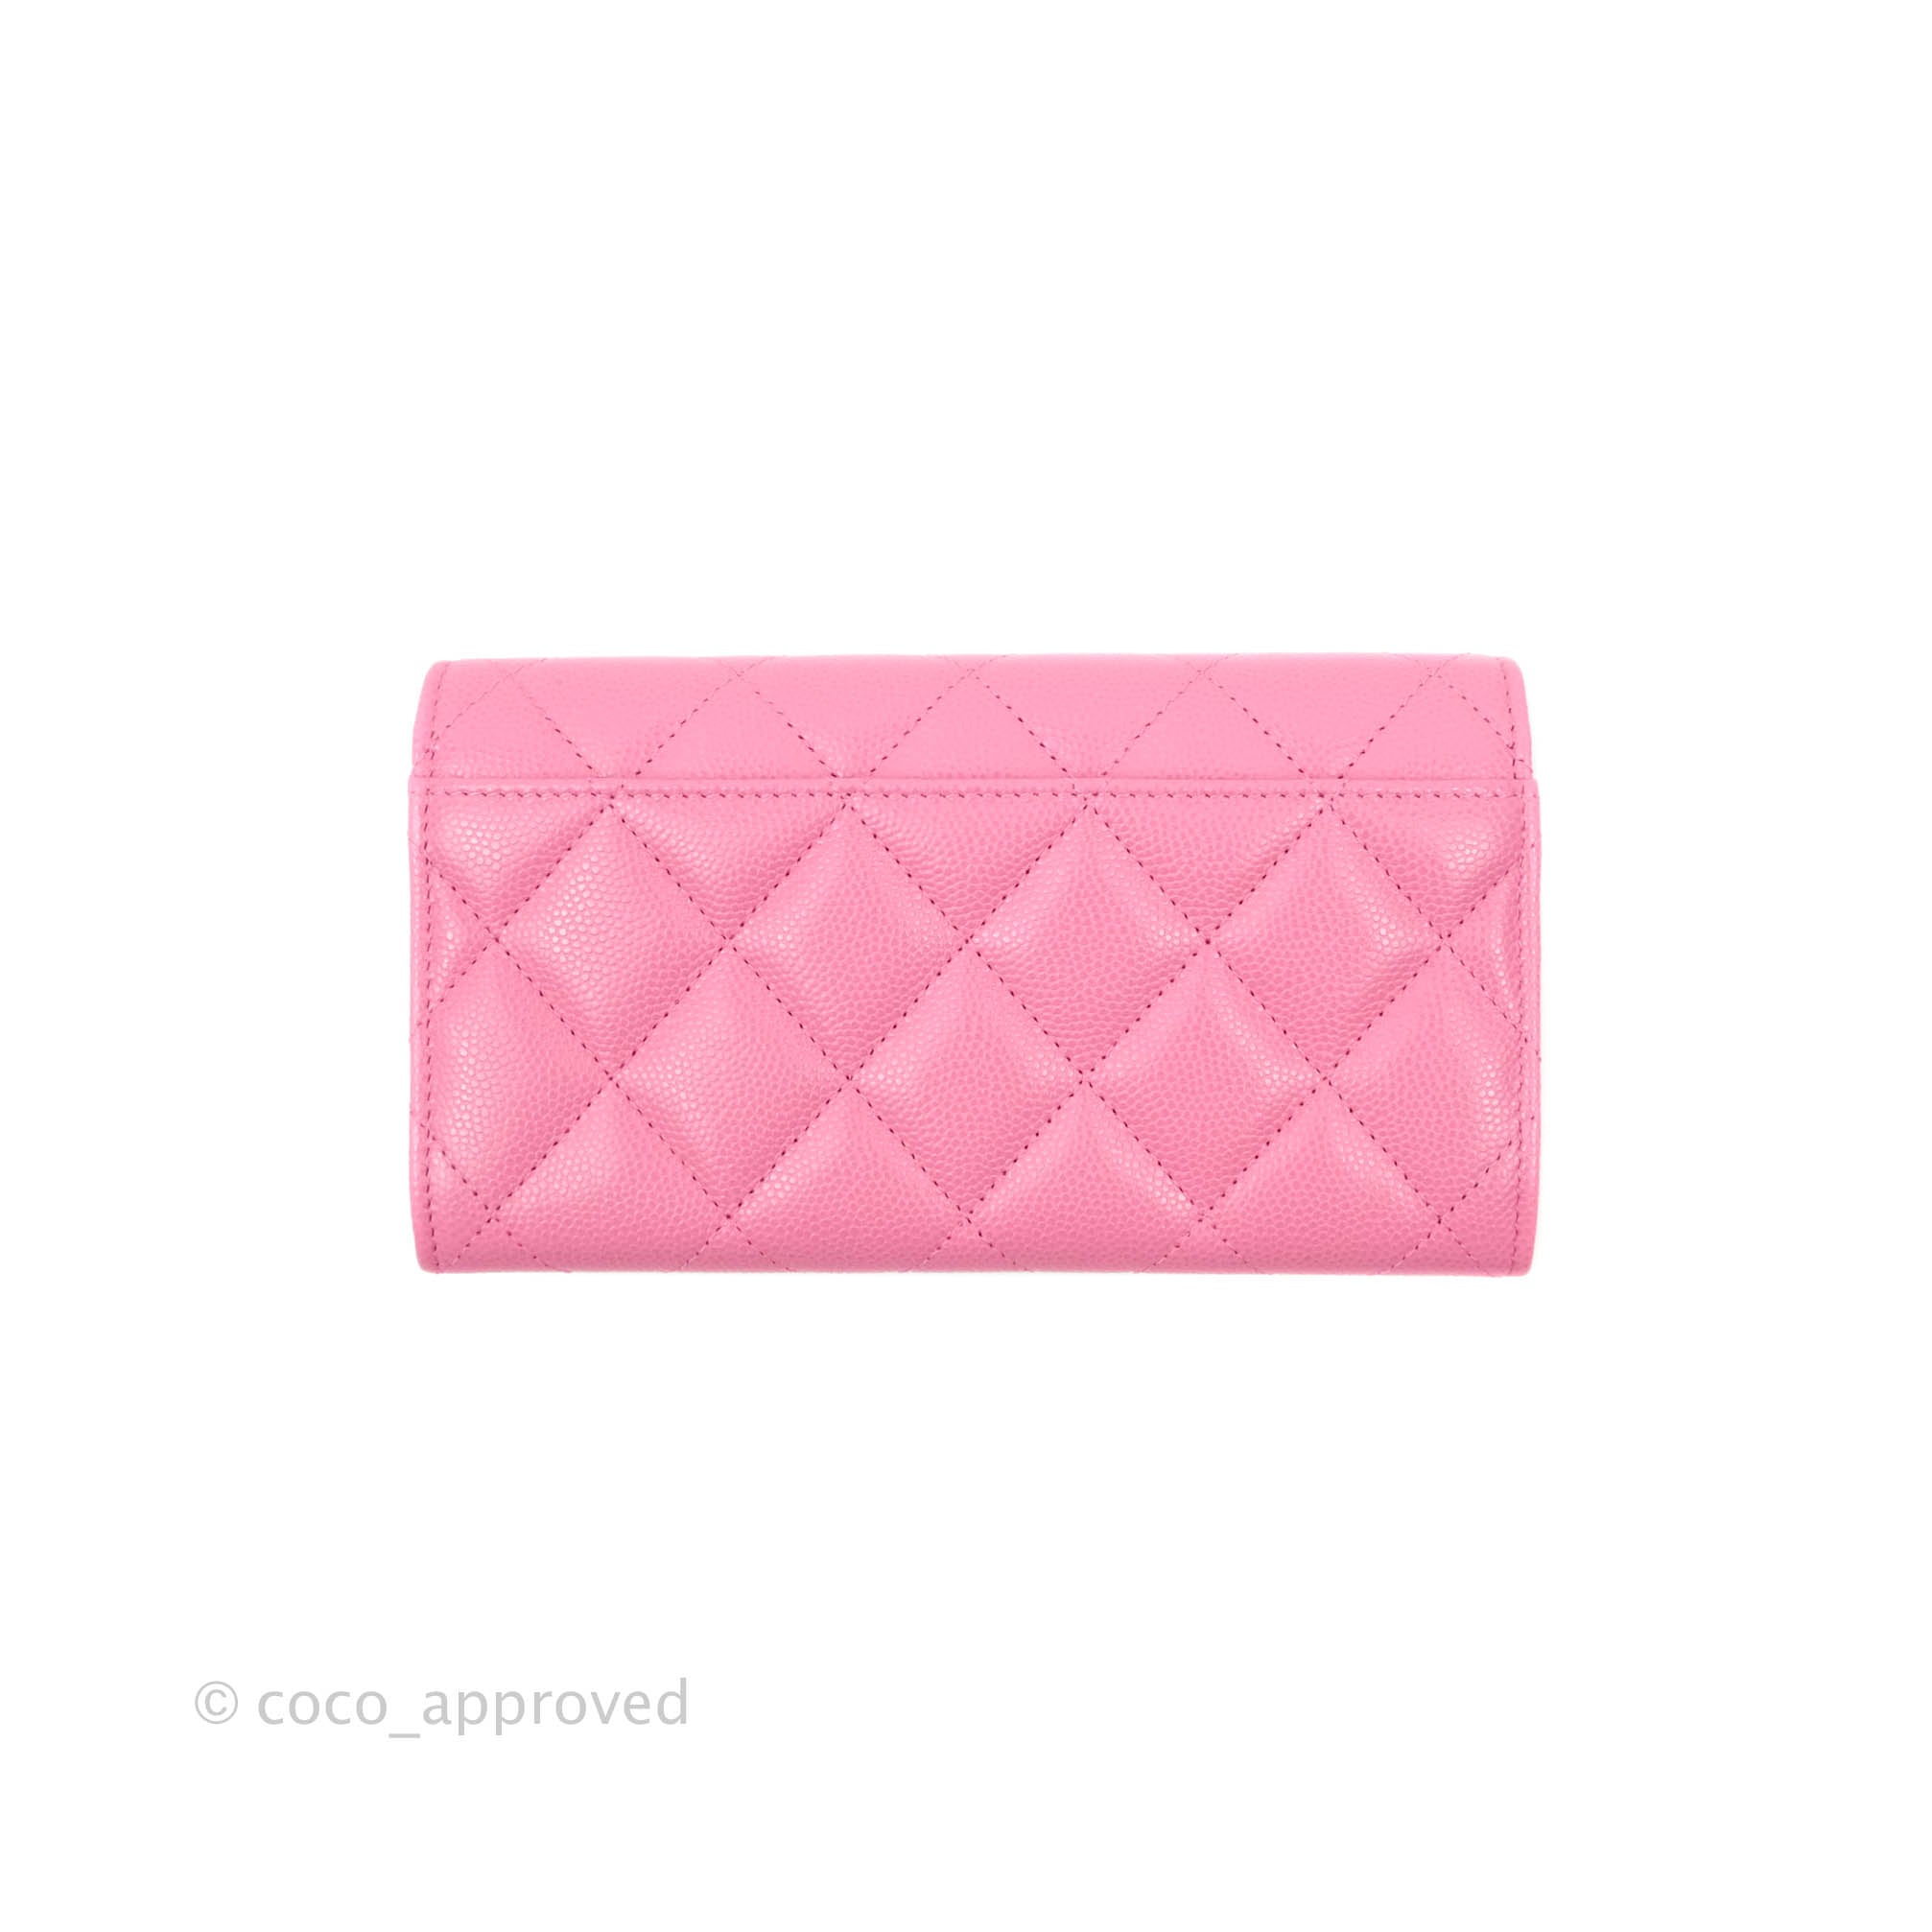 CHANEL Iridescent Caviar Quilted Flap Card Holder Rose Pink 1295208